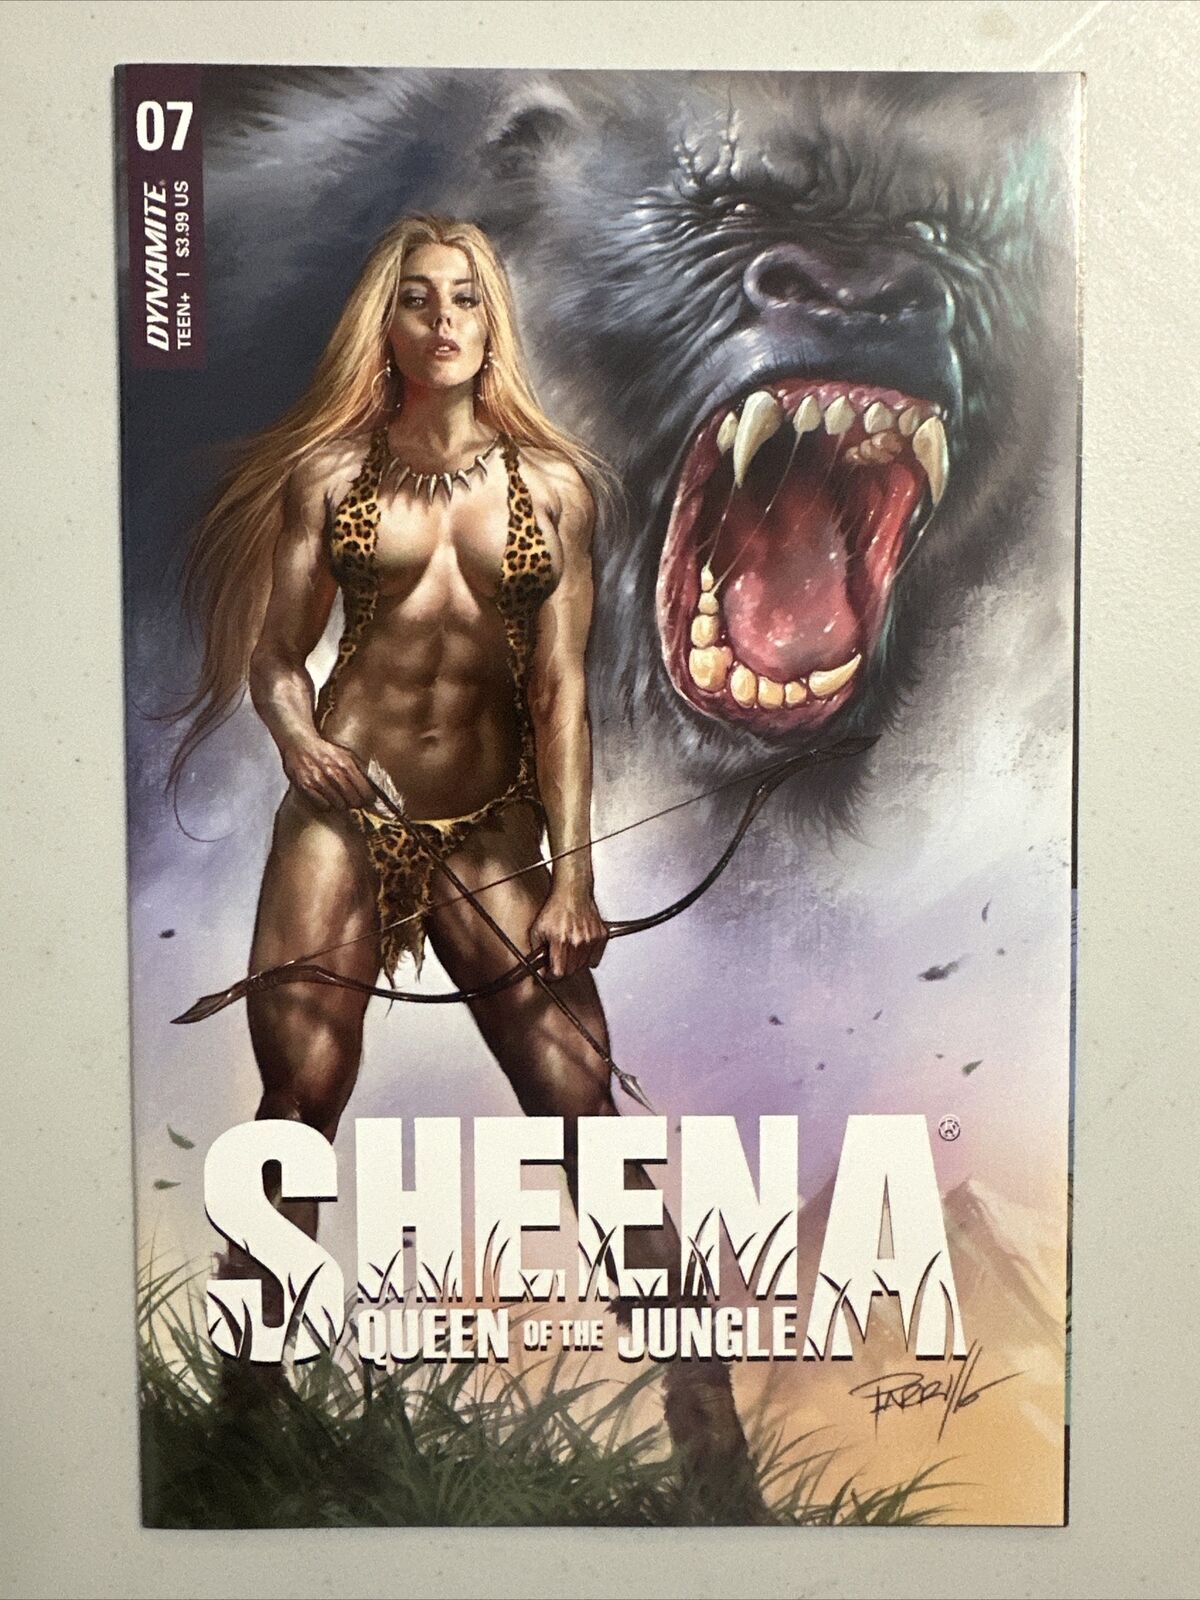 Sheena Queen Of The Jungle #7 Parrillo Dynamite HIGH GRADE COMBINE S&H RATE